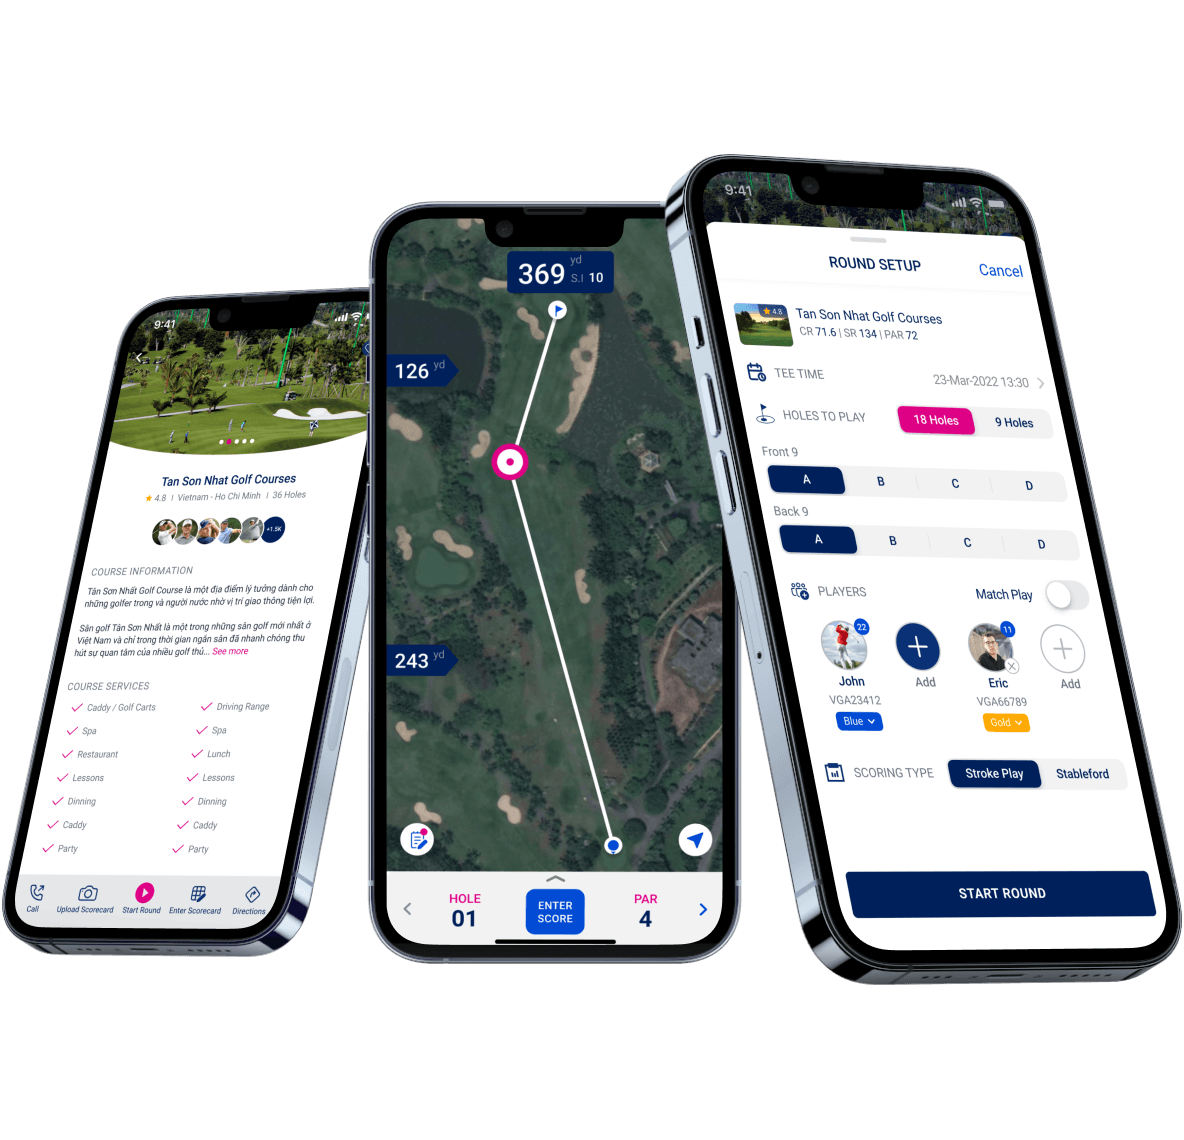 Quickly search courses, setup round and play golf with your friends